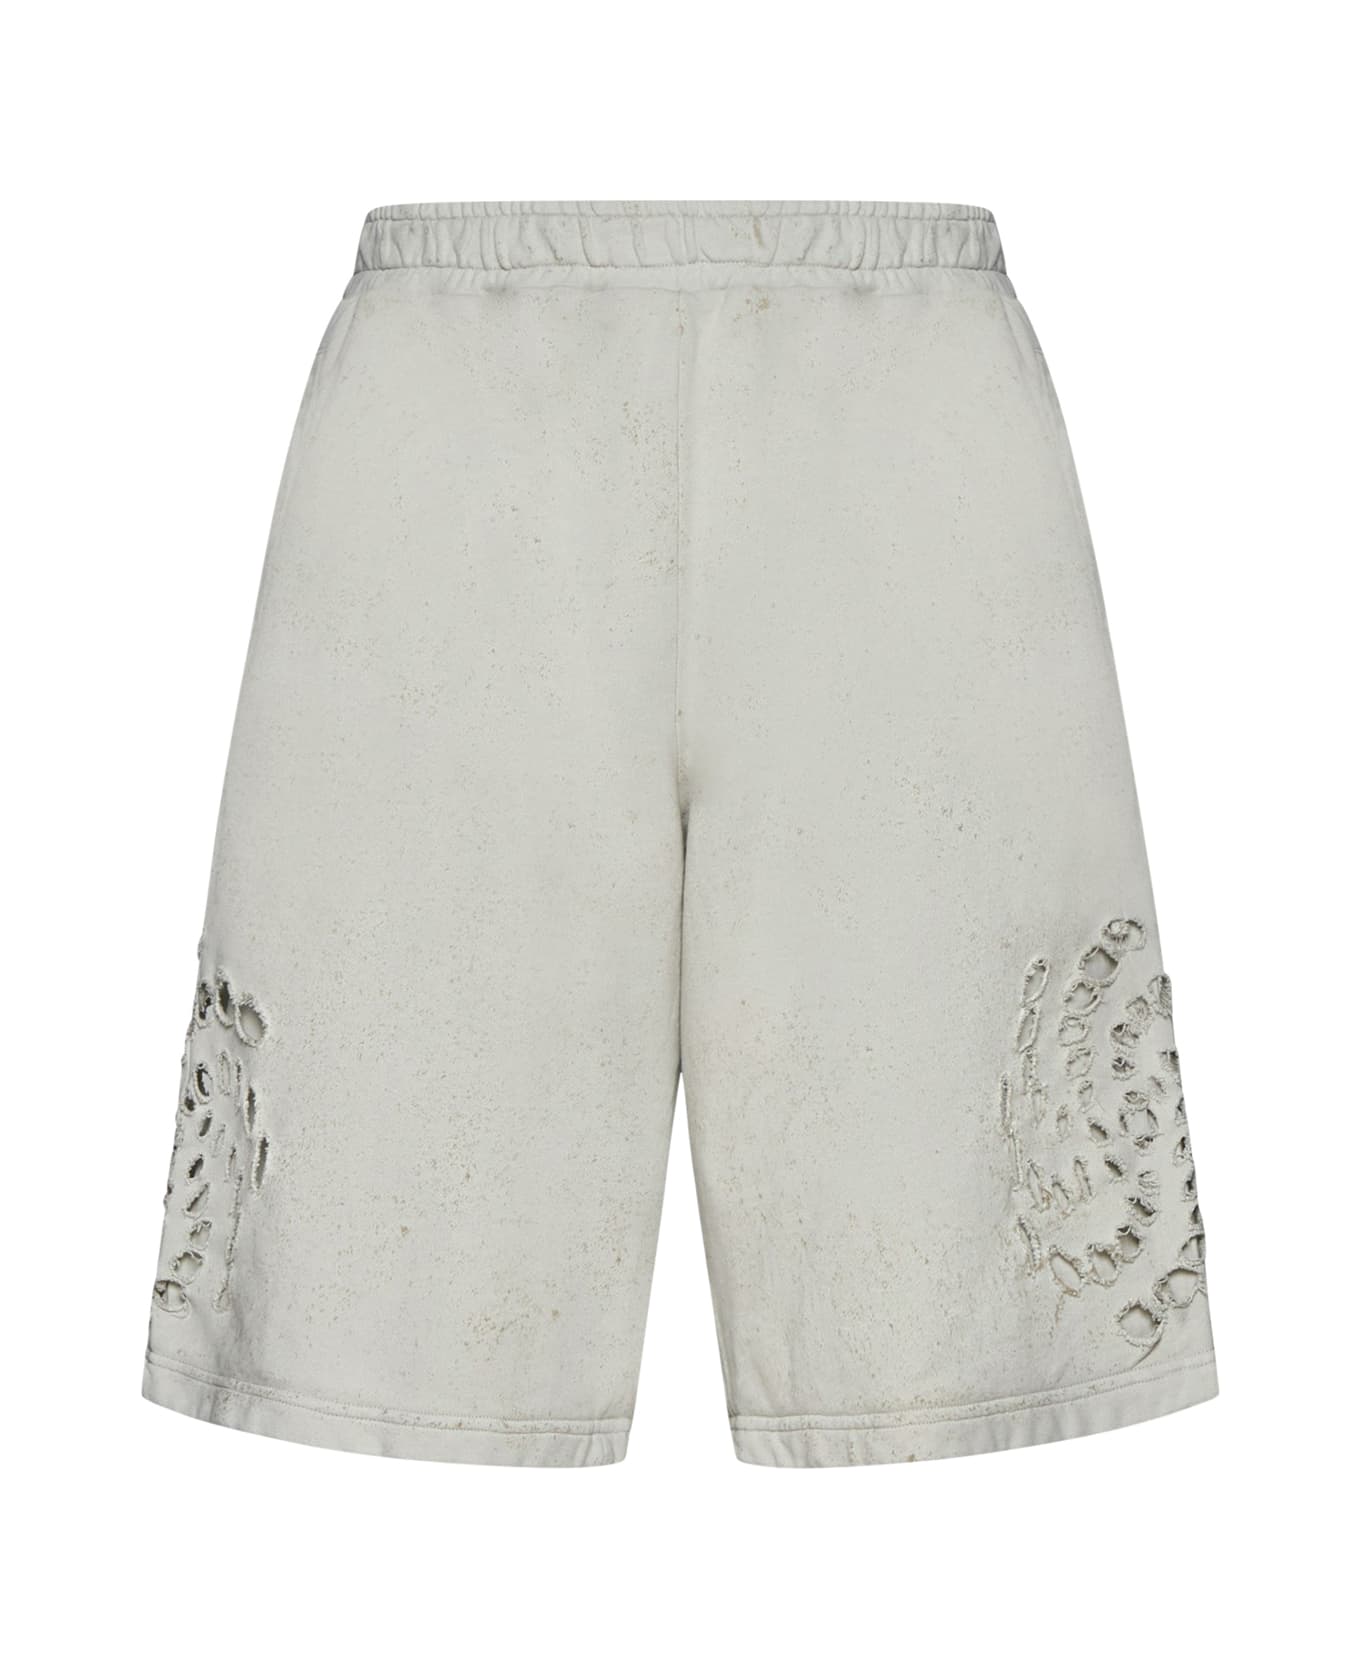 44 Label Group Trip Short - Dirty White Gyps